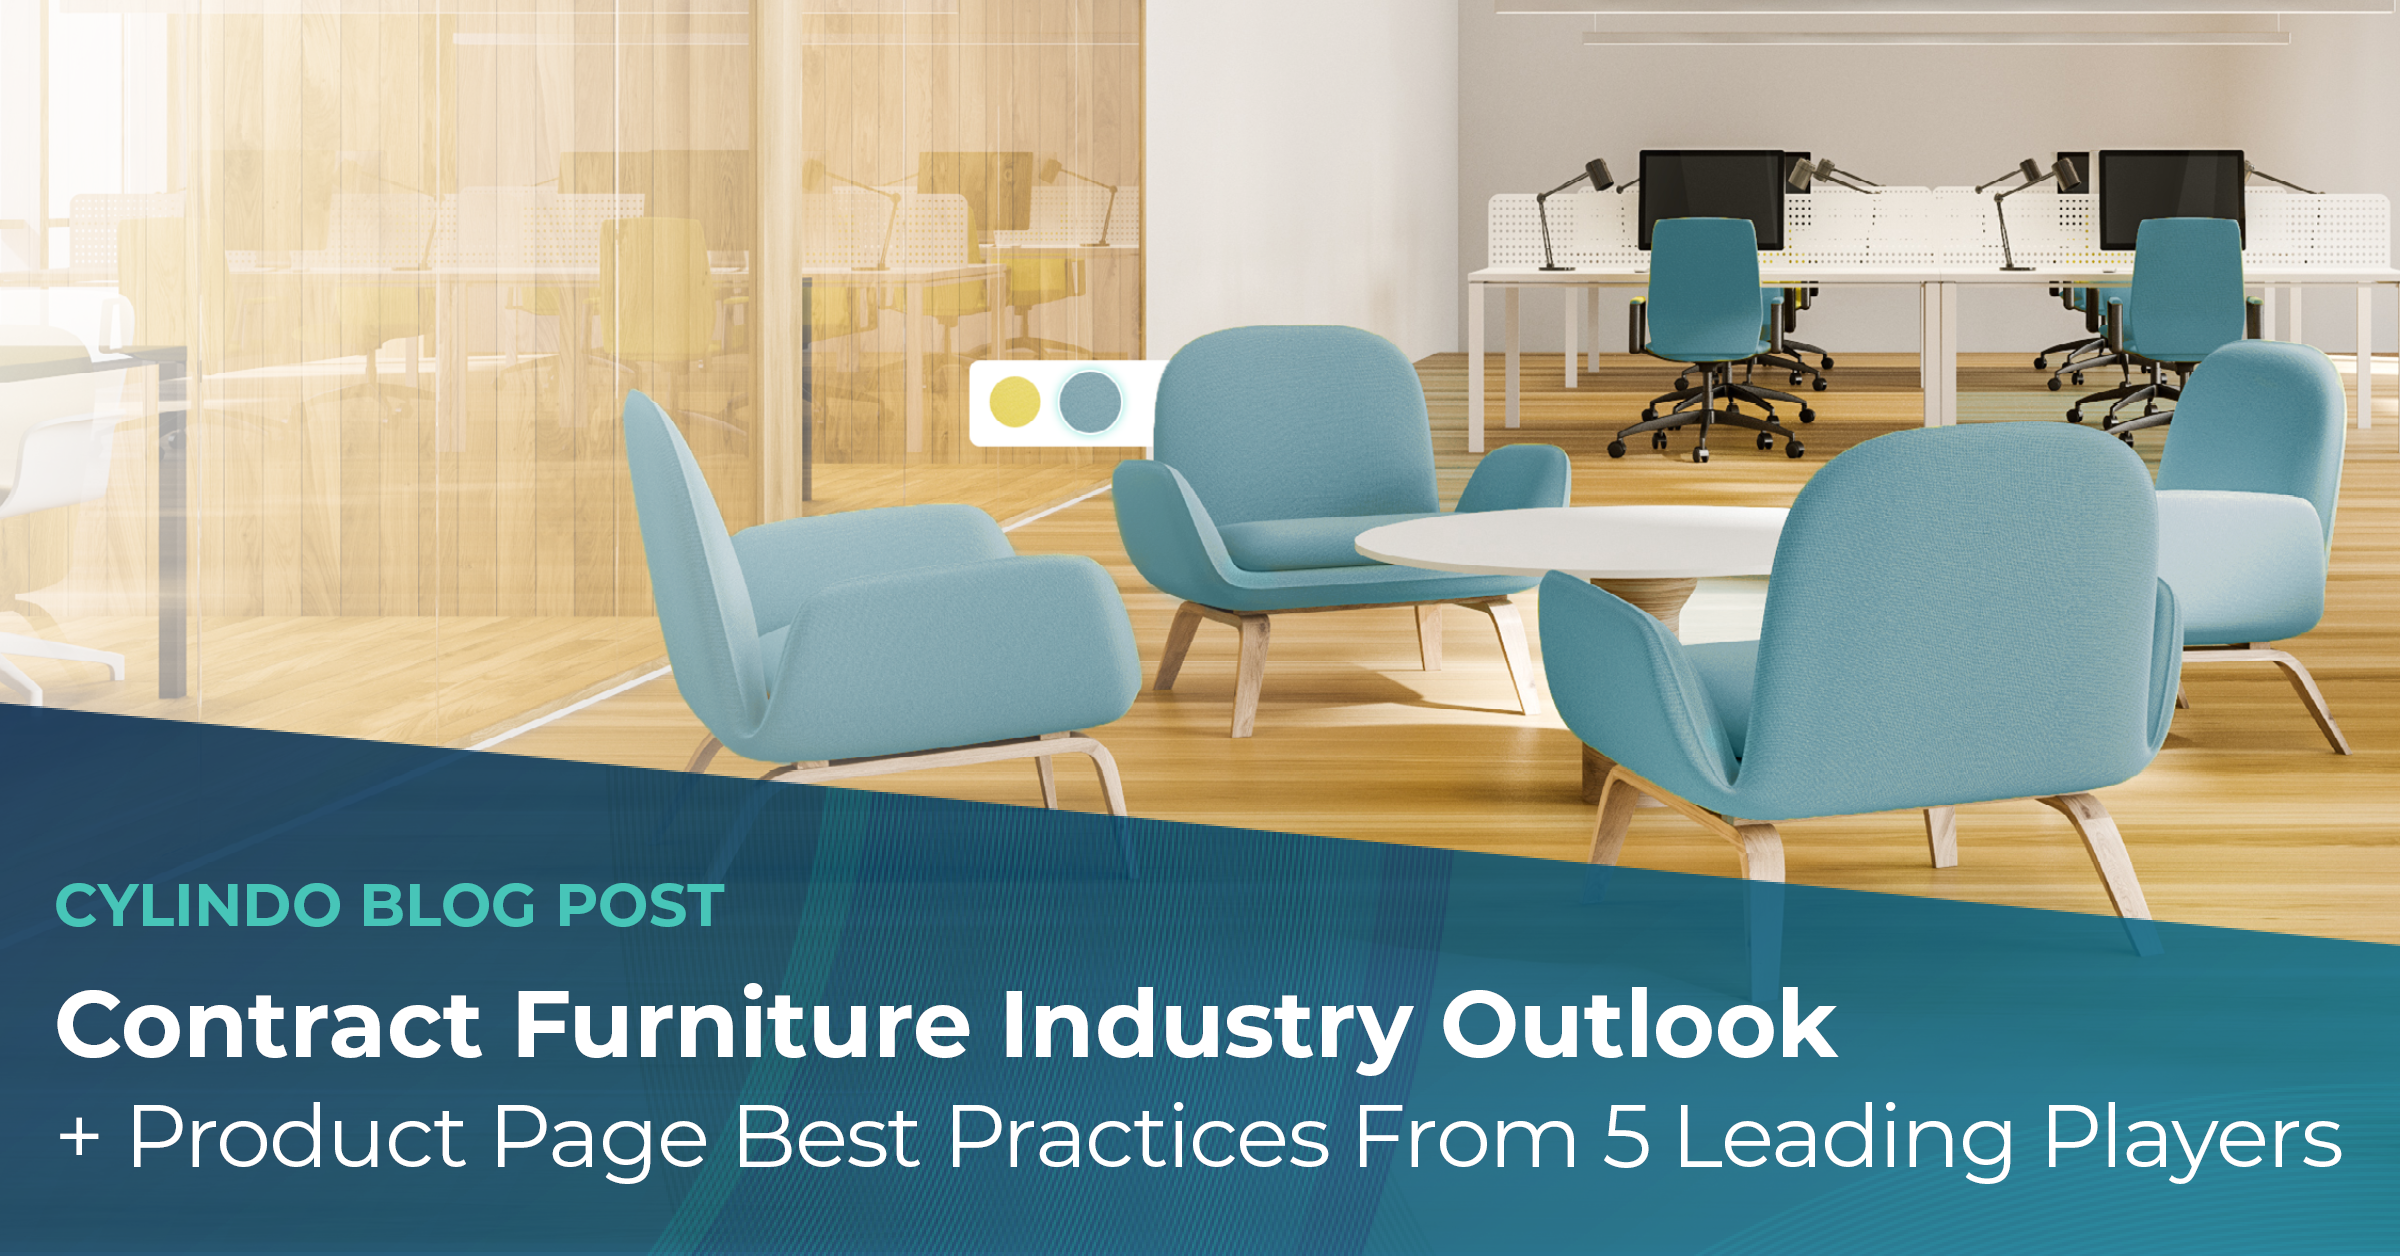 Contract furniture industry outlook